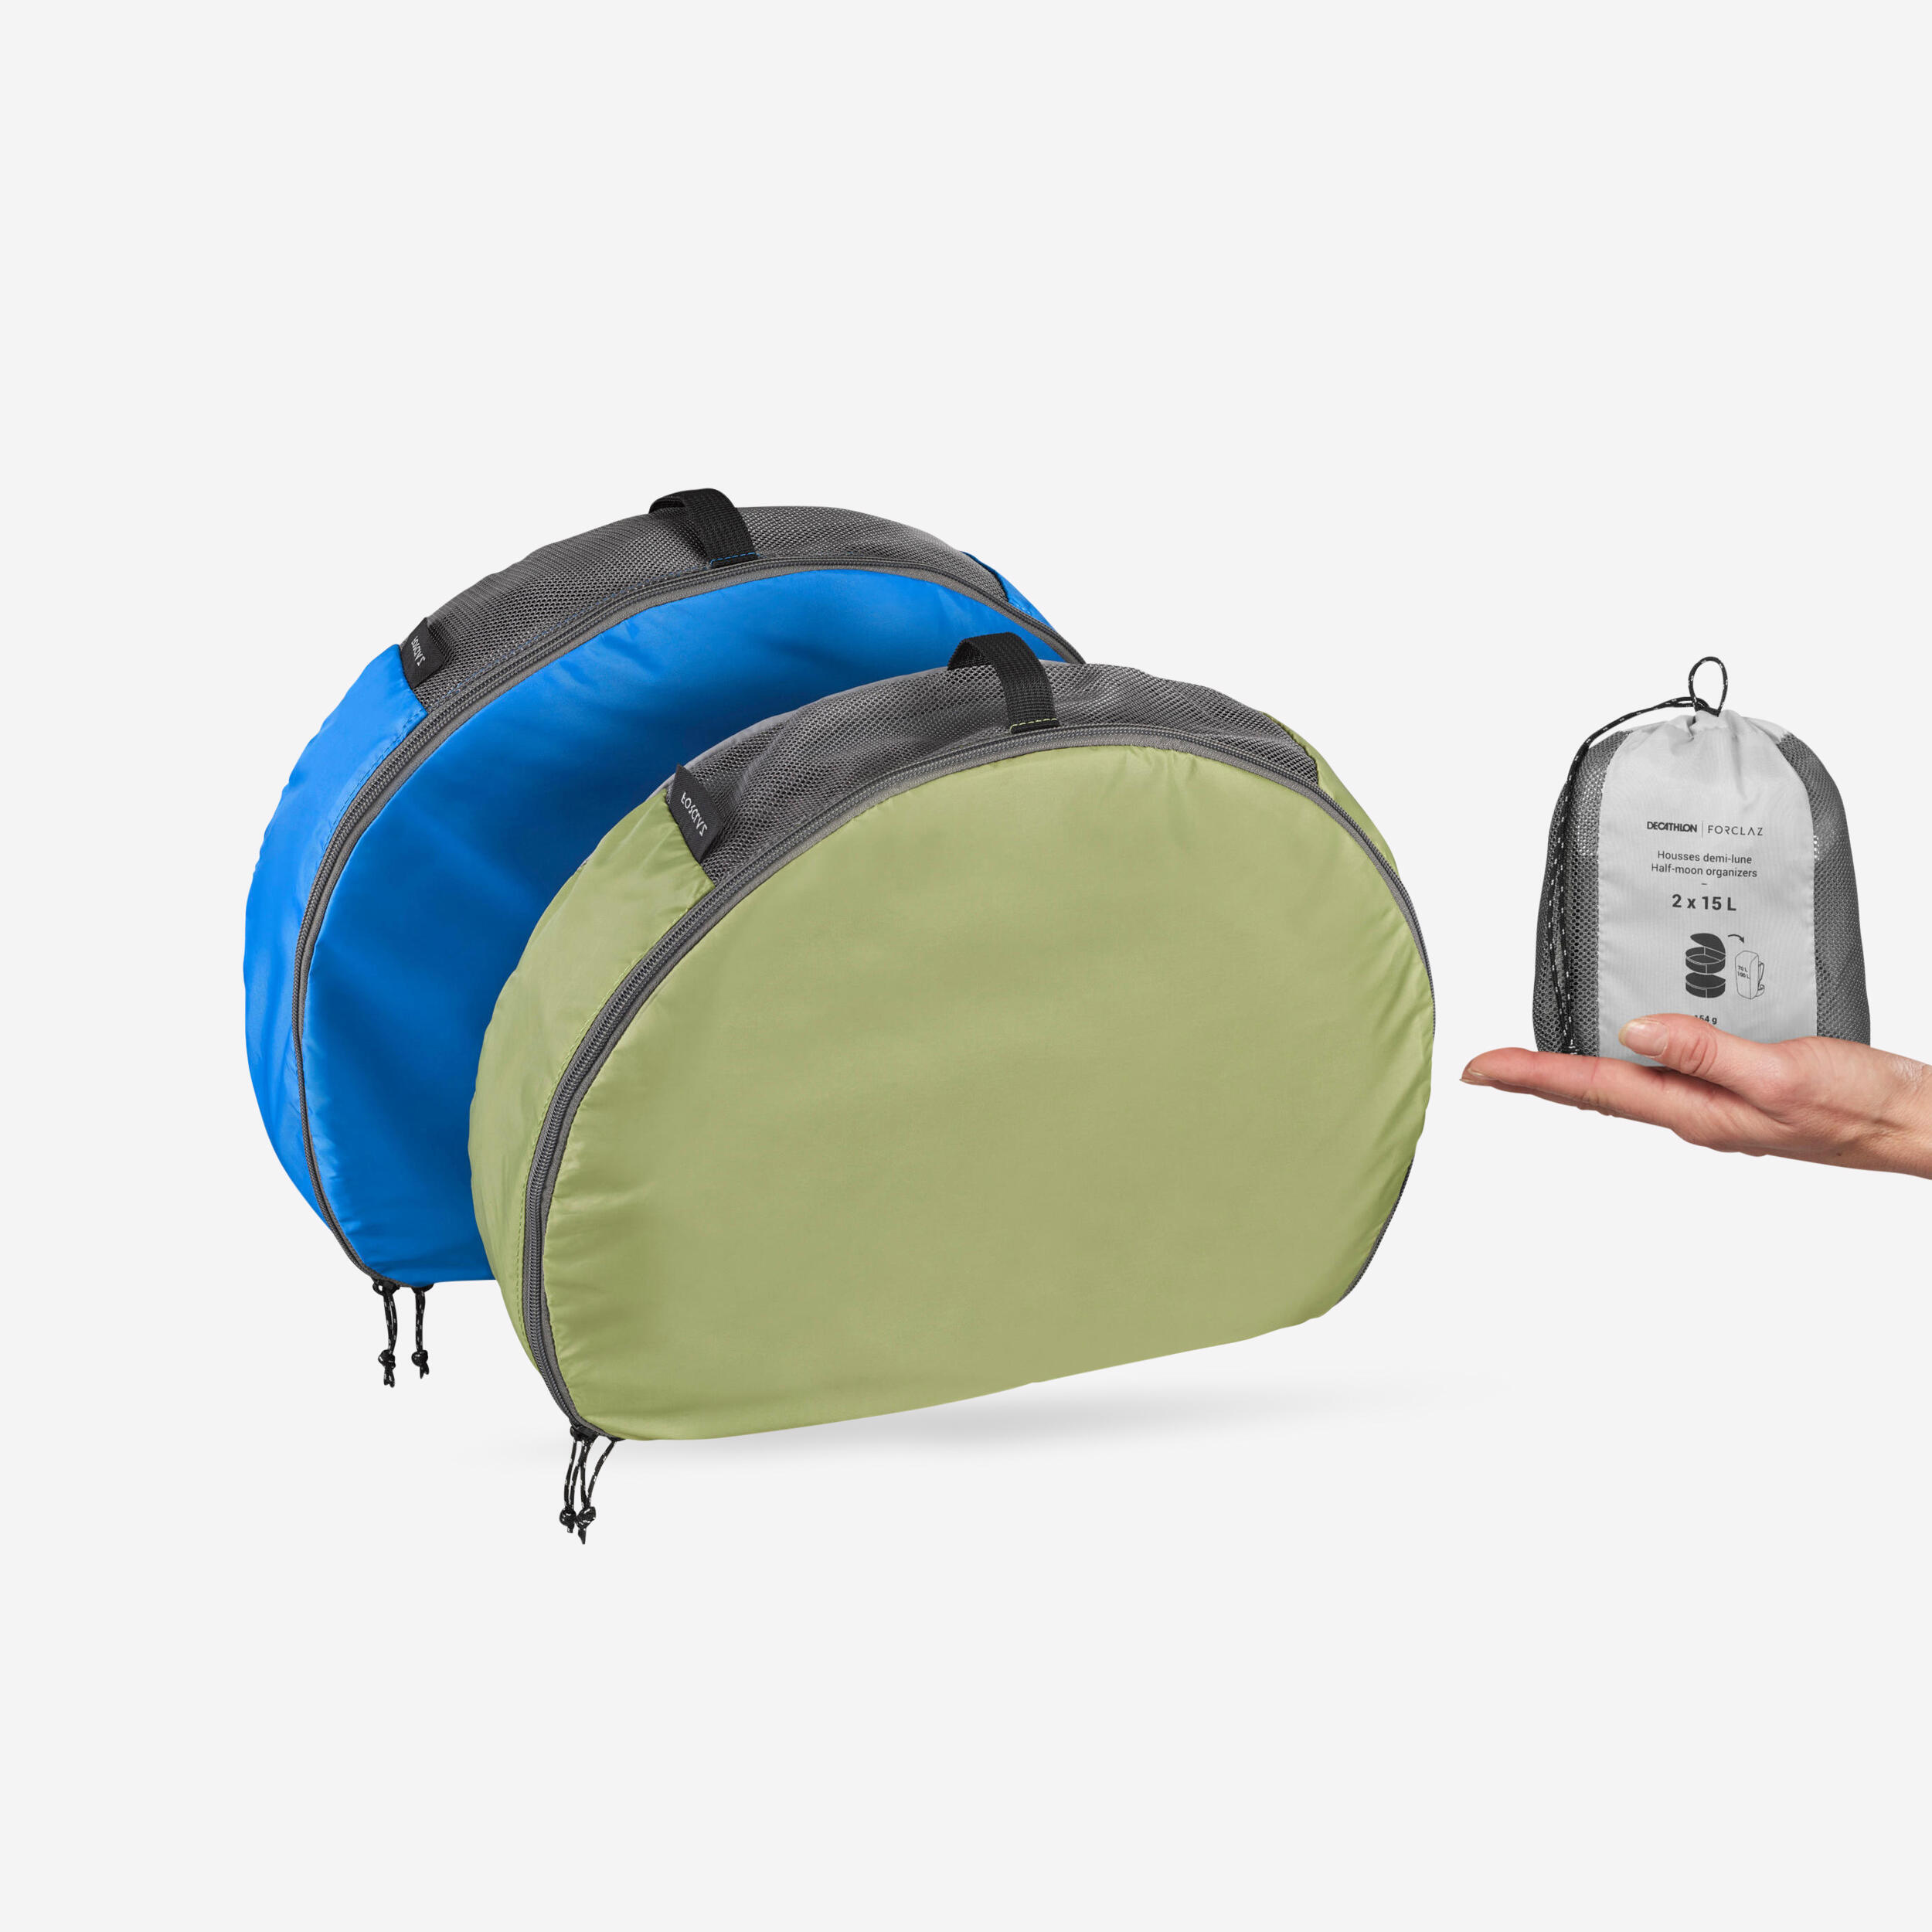 FORCLAZ 2 Half-Moon Bags For 70-90 L Backpacks